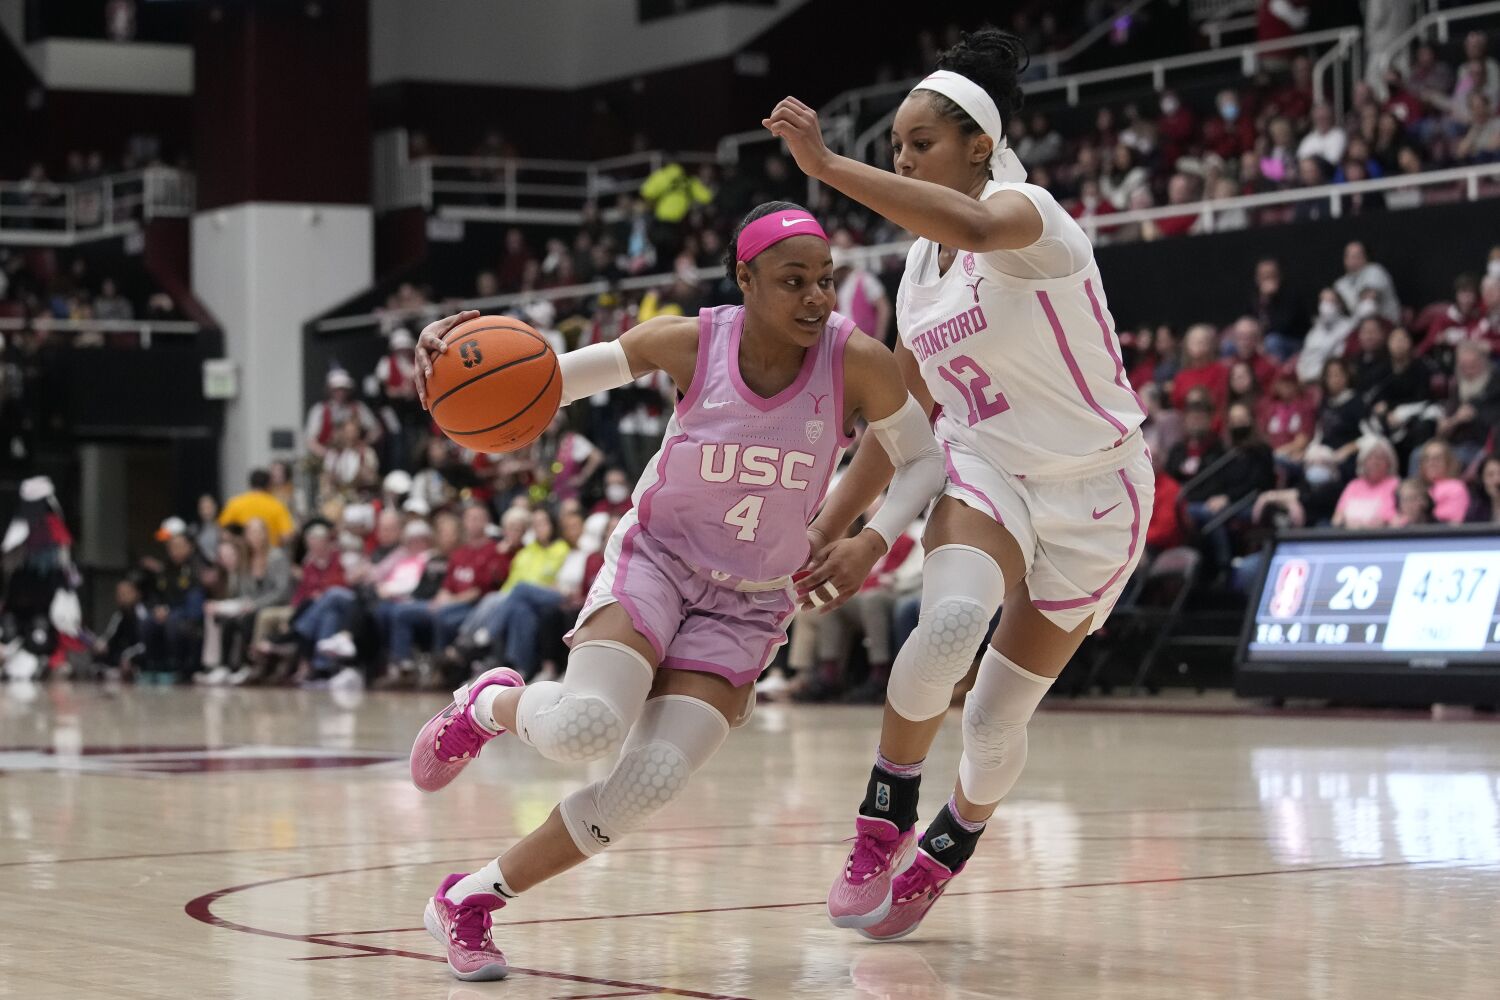 USC's bid for another upset over Stanford falls short in narrow loss